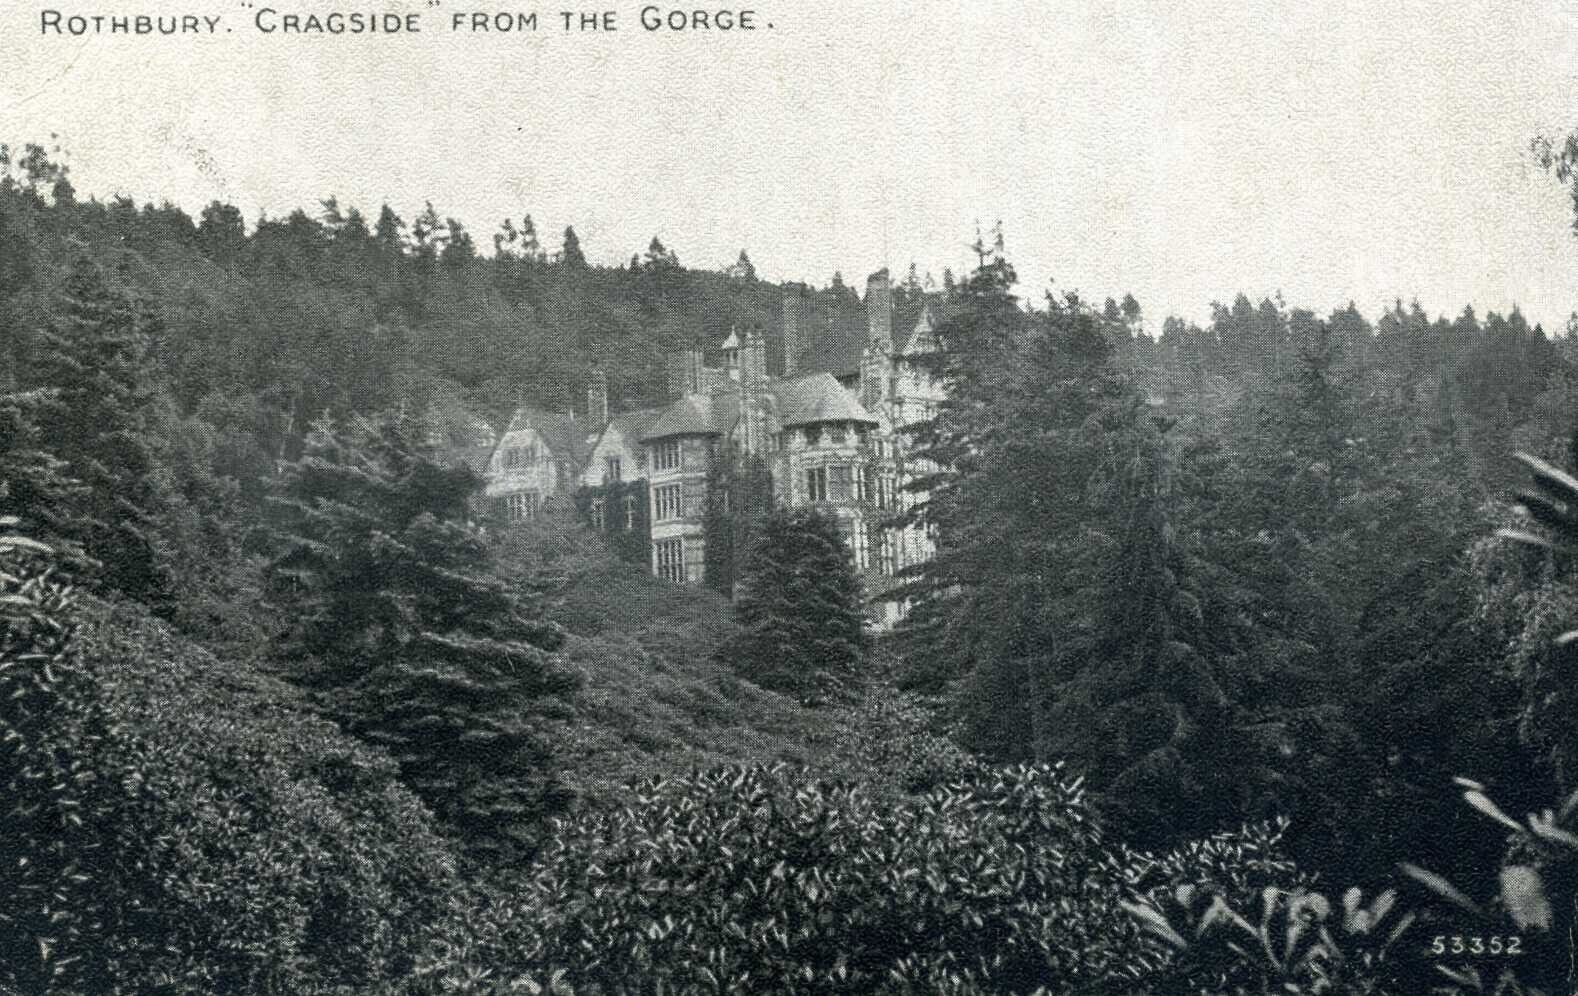 Service. Rothbury, "Craigside from the Gorge"